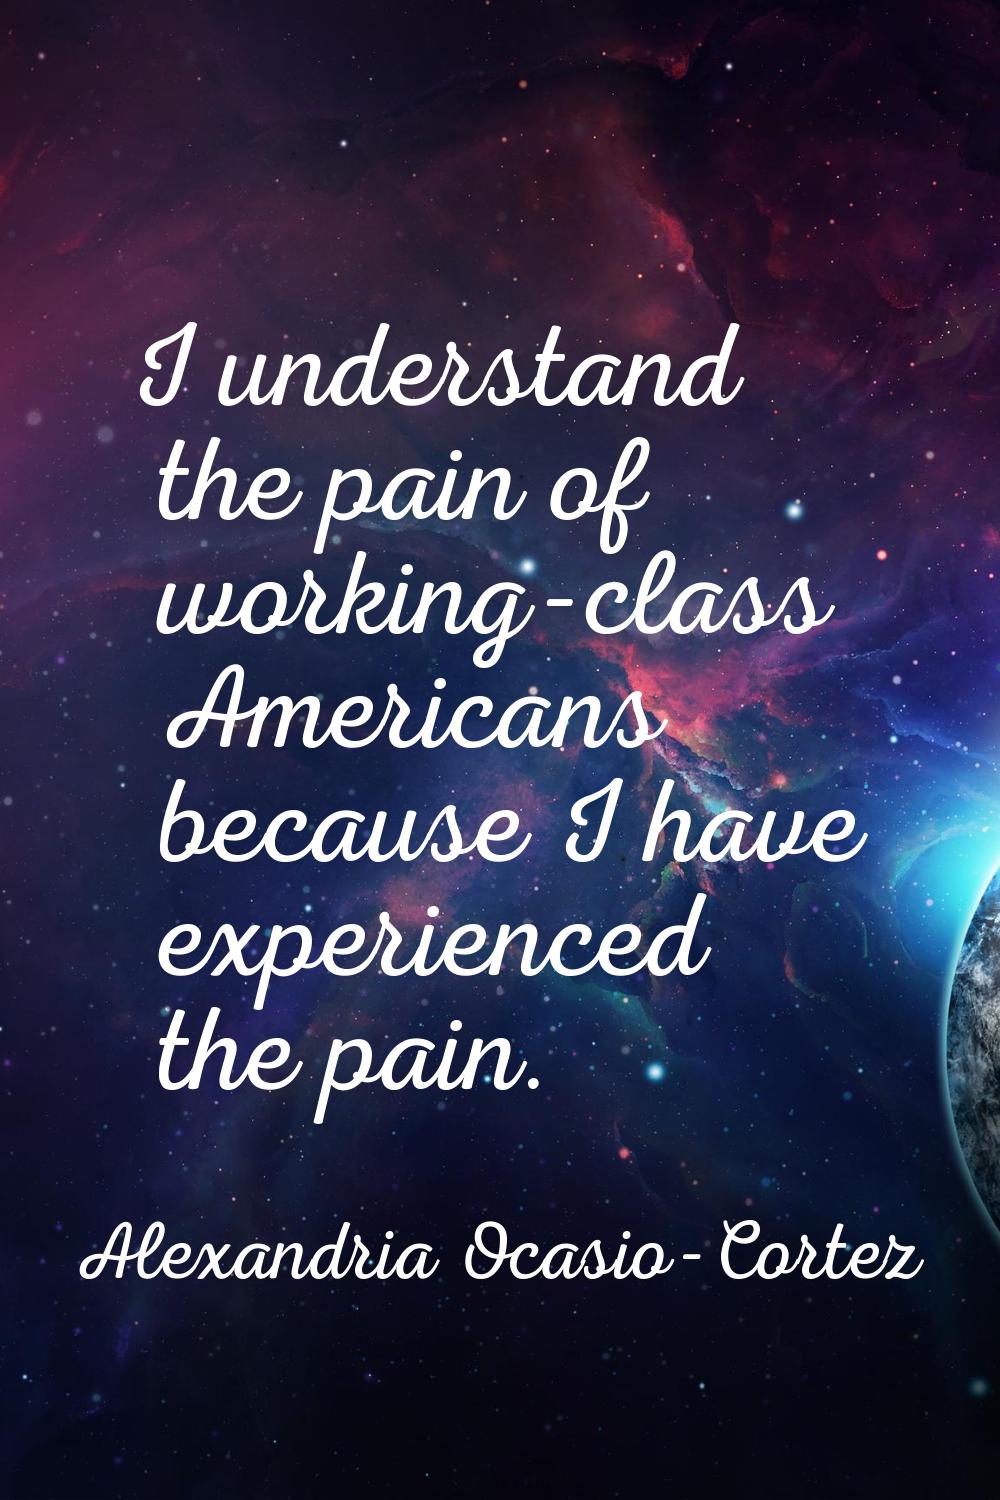 I understand the pain of working-class Americans because I have experienced the pain.